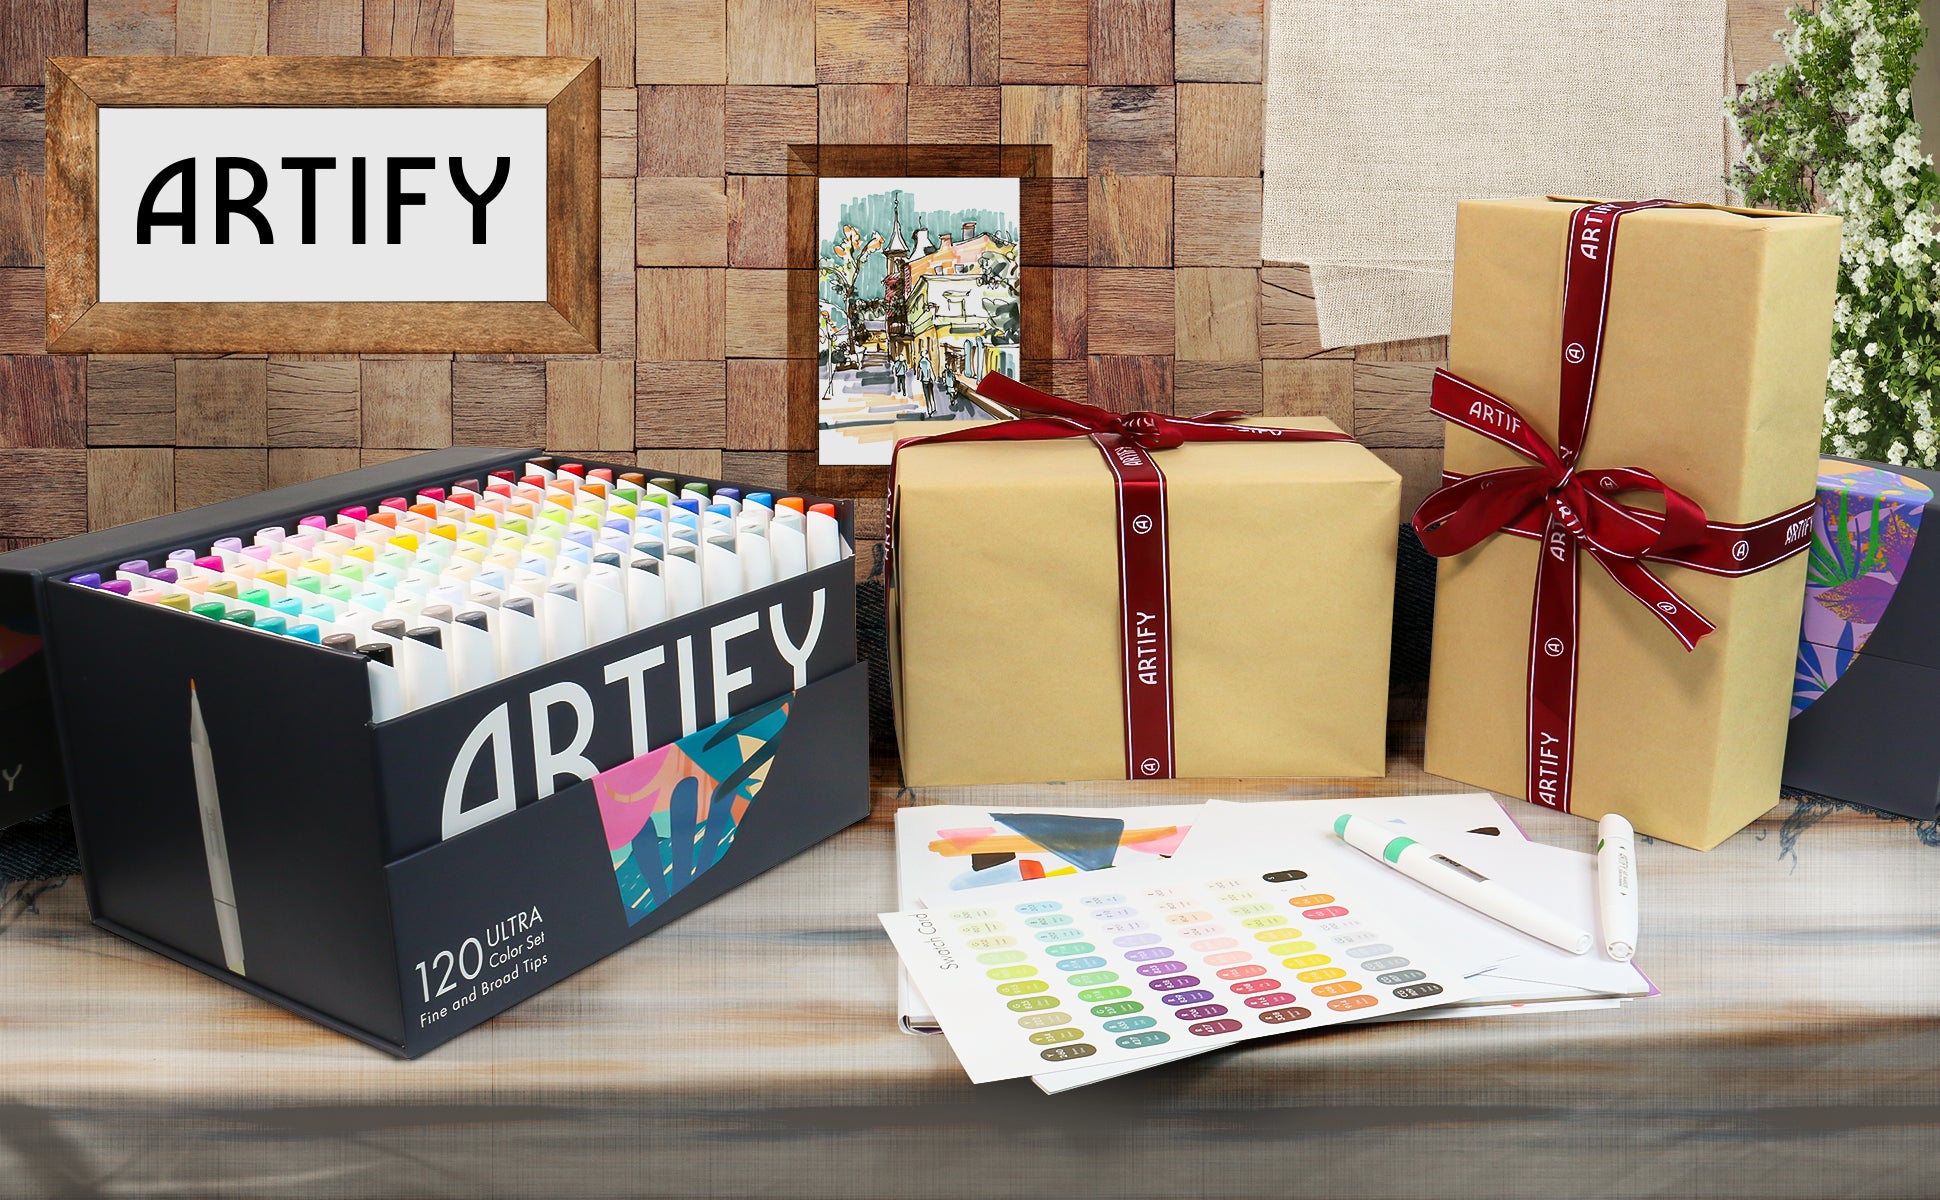 ARTIFY 120 Ultra Colors Fine & Broad Dual Tips Art Markers – Artify